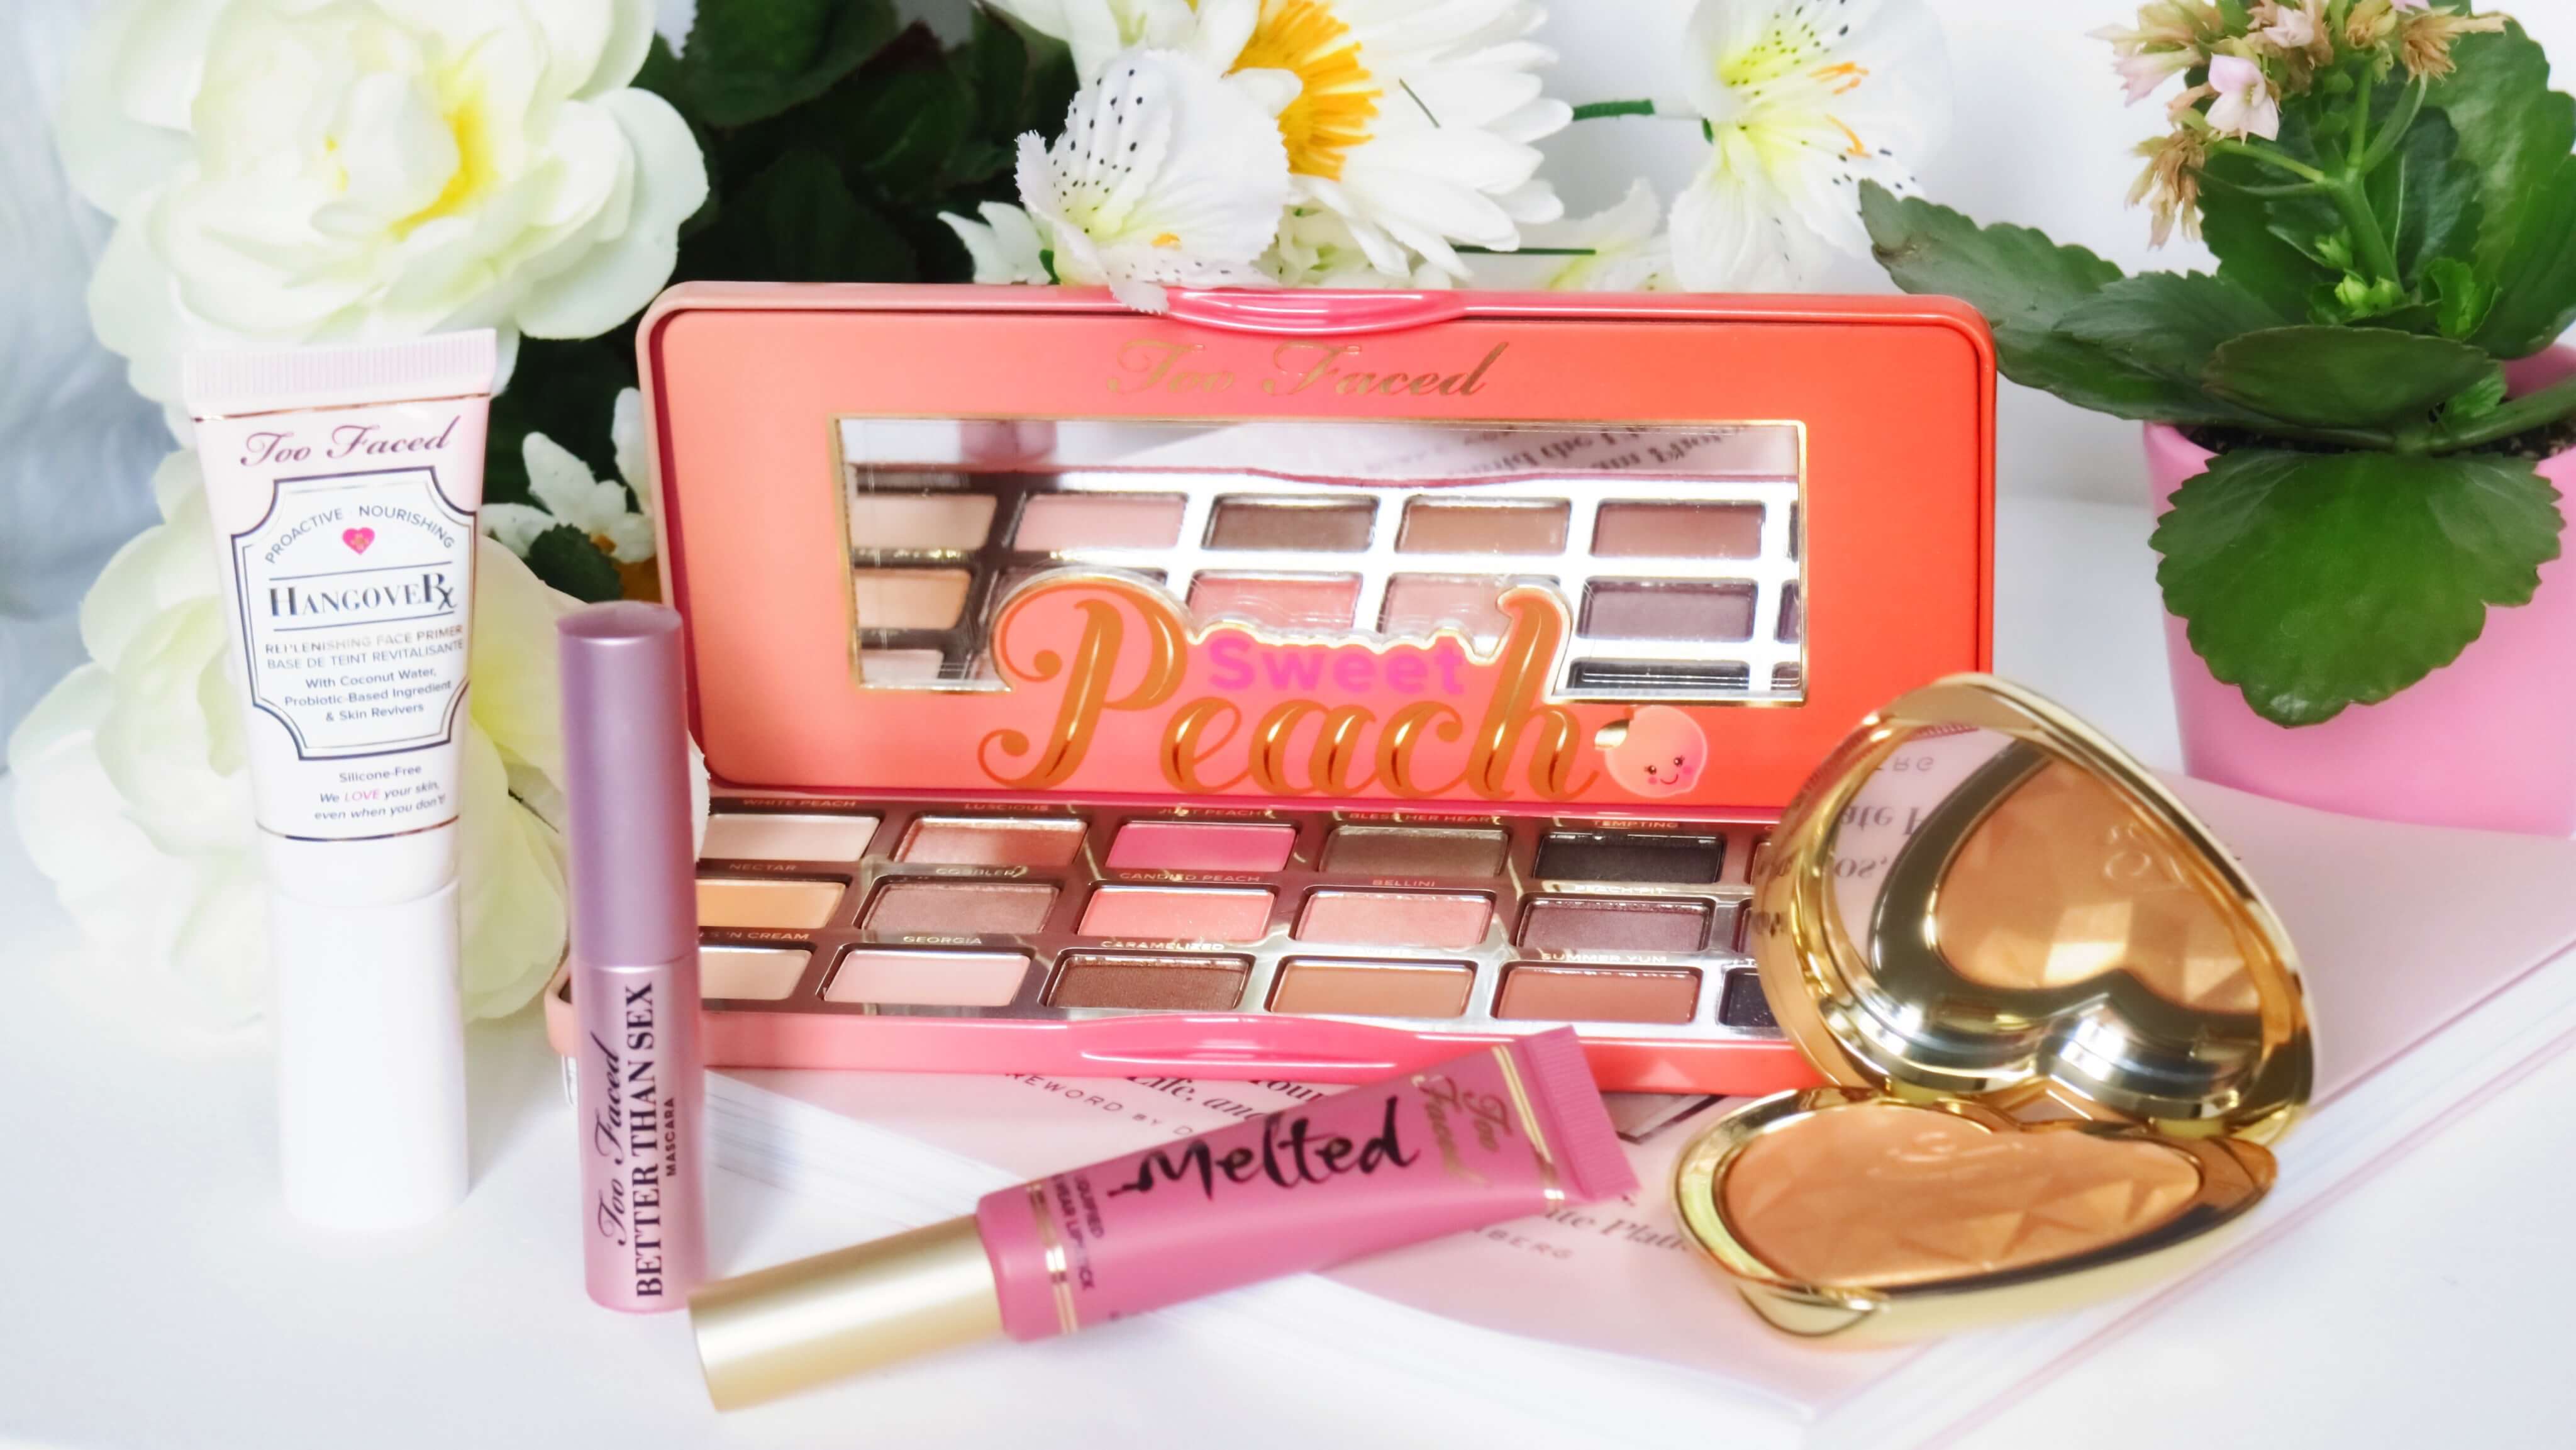 Too faced sweet peach palette, hangover face primer, better than sex mascara, melted liquefied longwear lipstick and love lights prismatic highlighter review